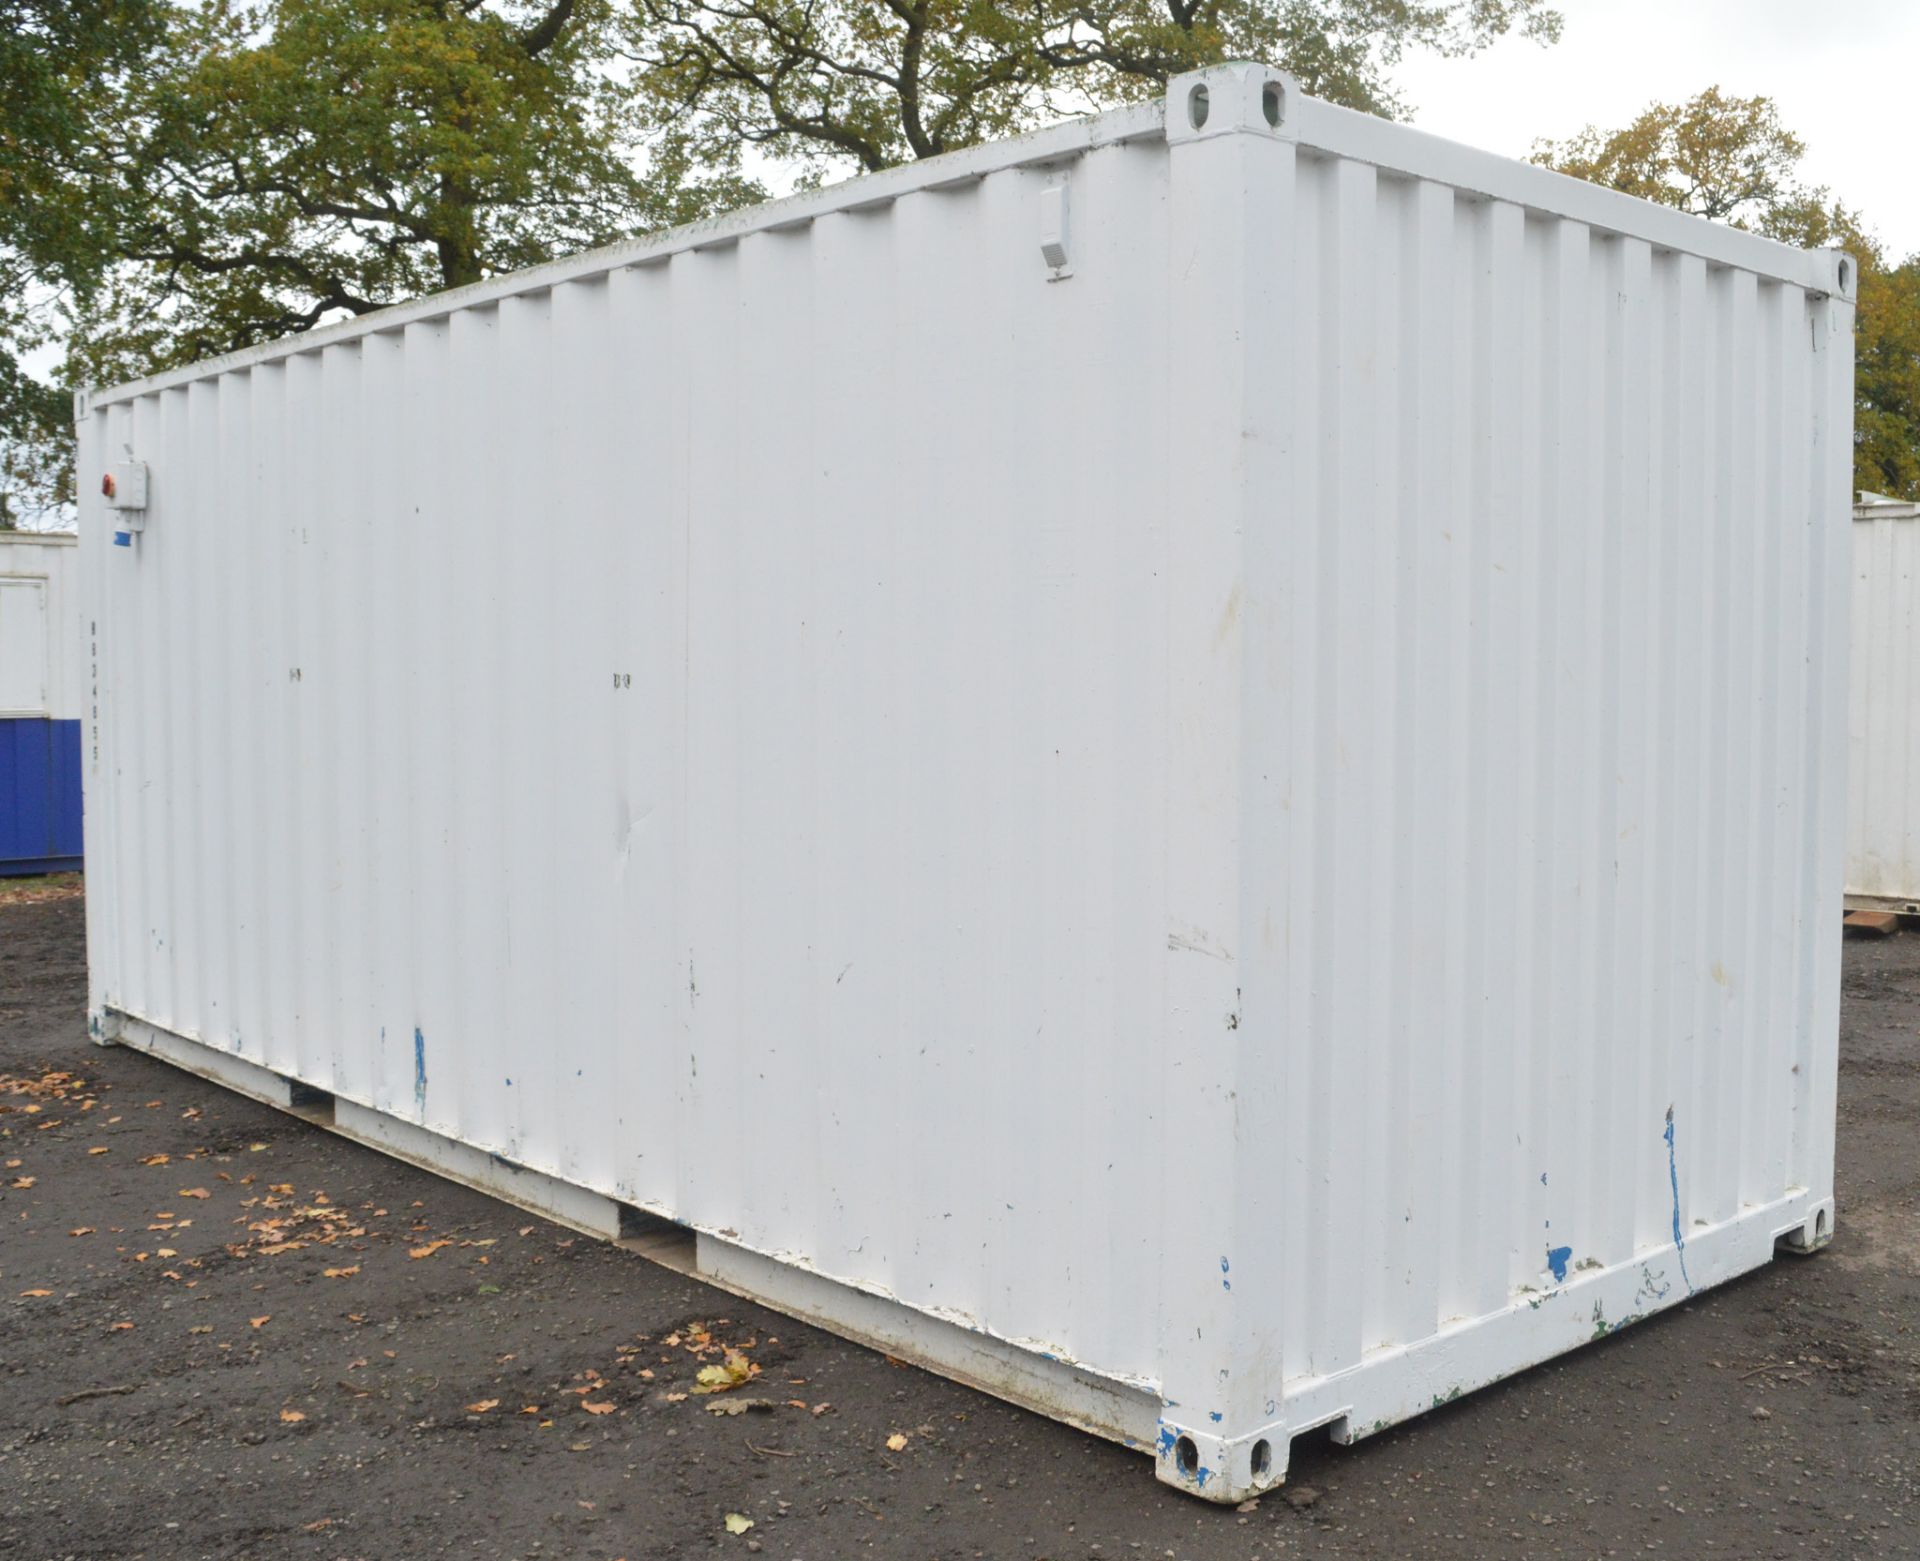 20 ft x 8 ft steel anti vandal shipping container BB34655 - Image 3 of 6